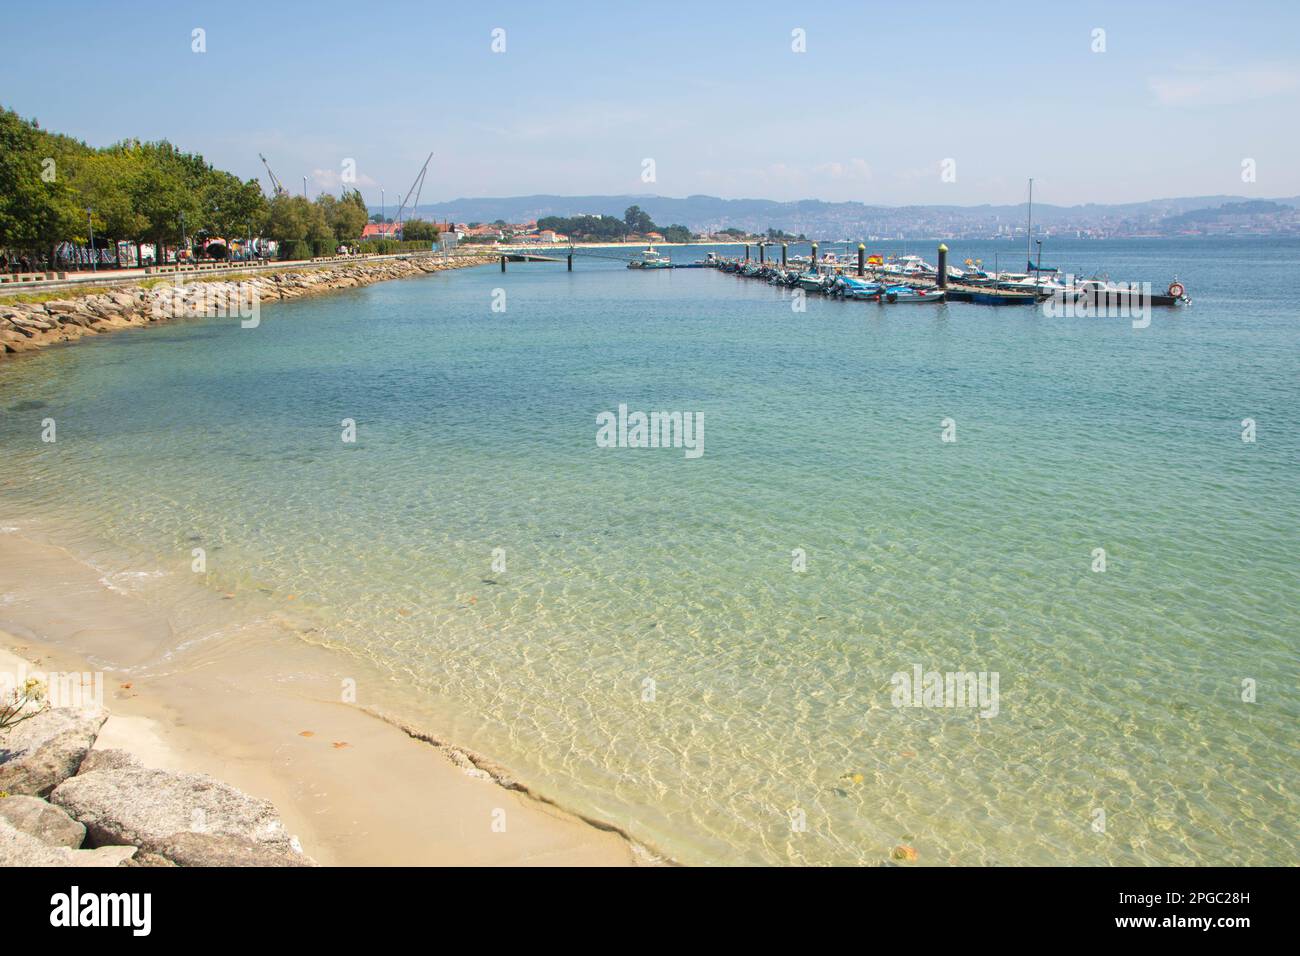 At Cangas, Spain, On 08-27-22, landscape of sea and coastline Stock Photo